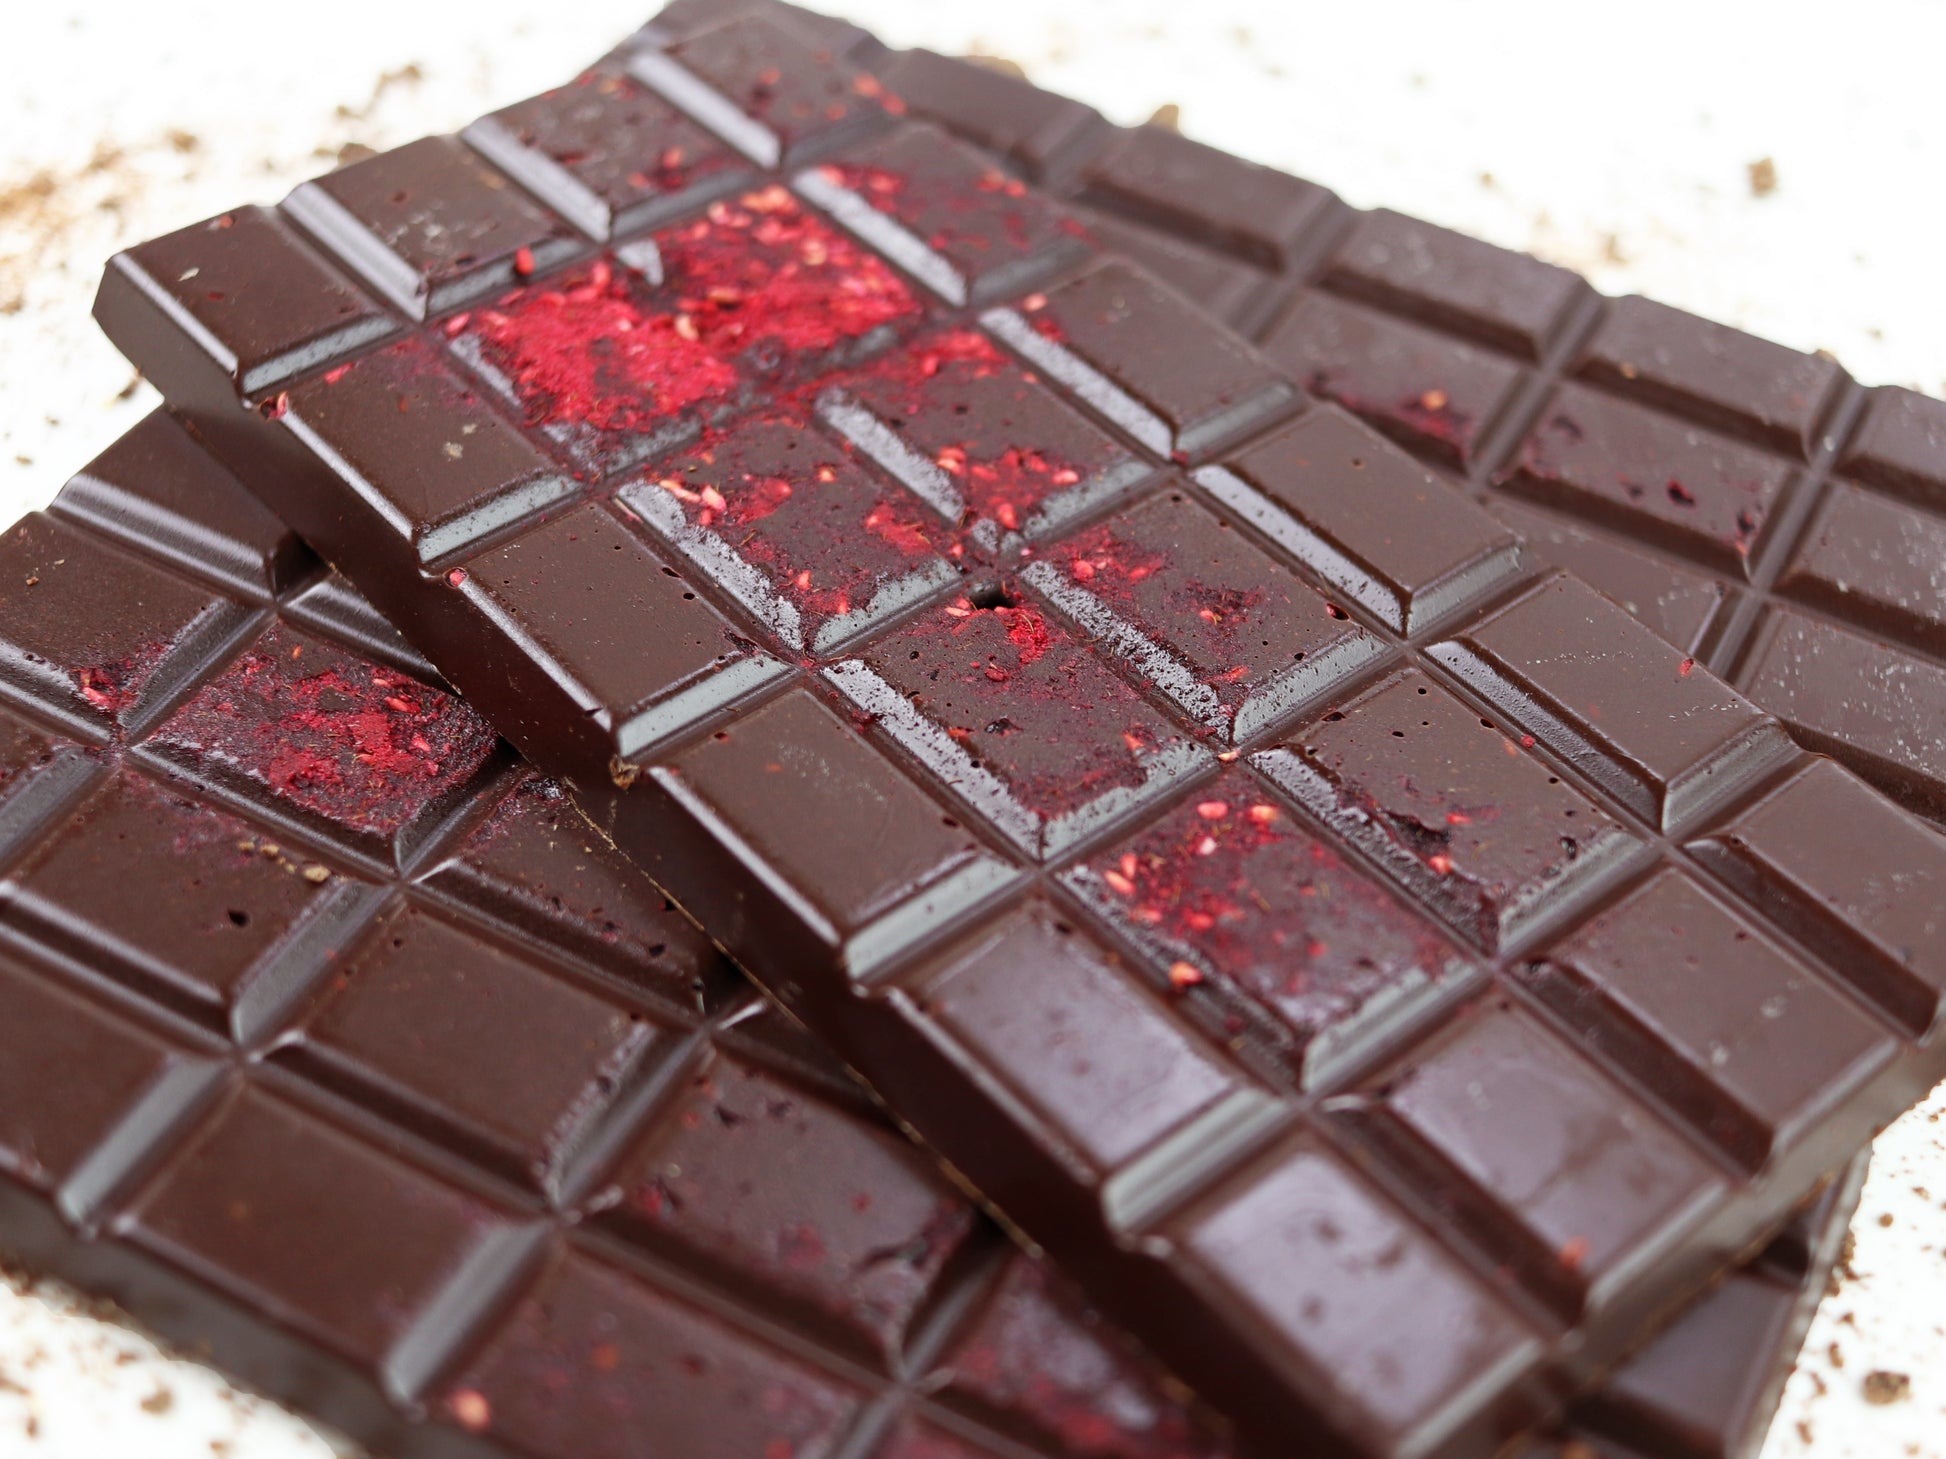 image shows 3, 100g hand made dark chocolate raspberry bars embedded with raspberry pieces.